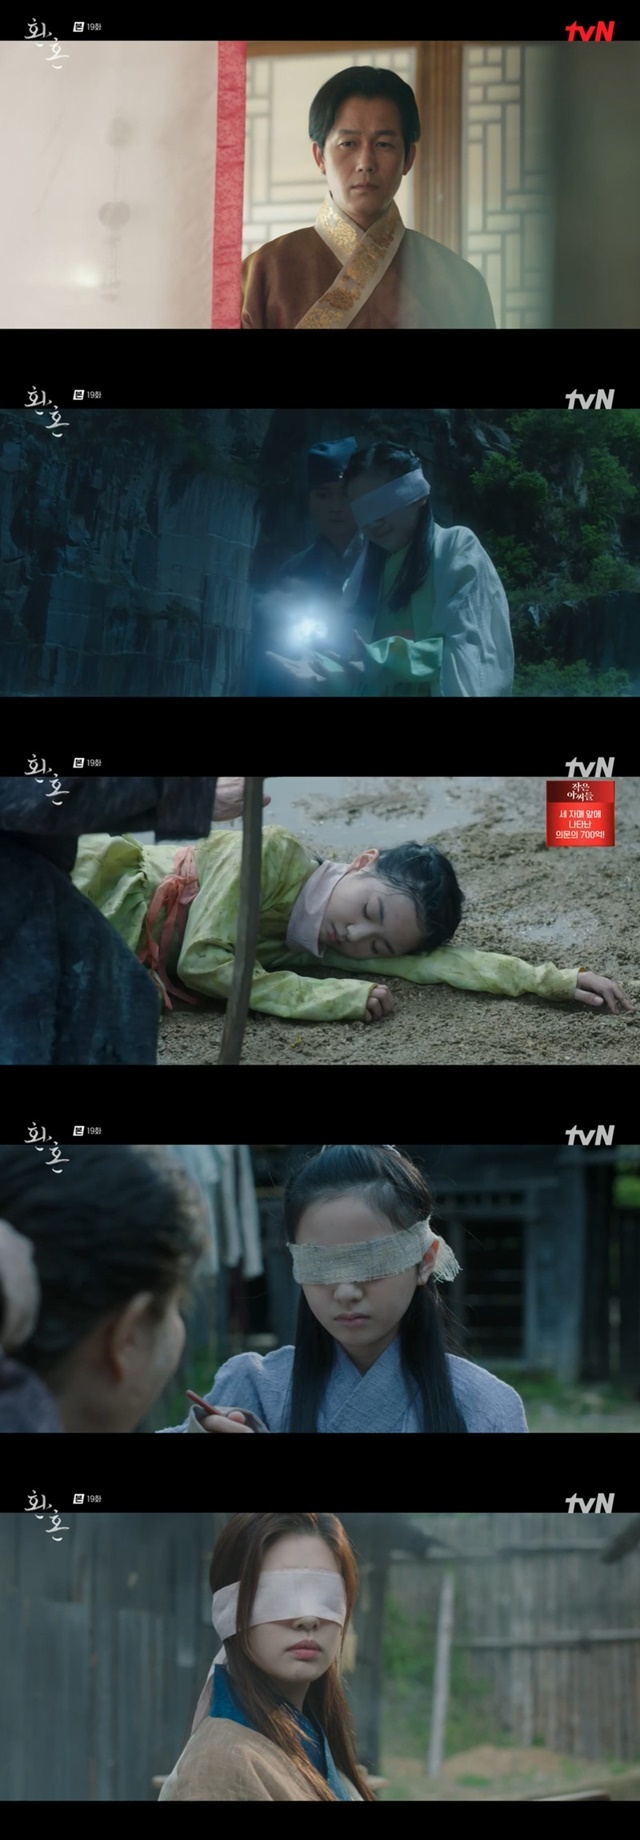 Jung So-mins history of becoming a virtue in the banquet was revealed.In the 19th episode of the TVN Saturday drama Alchemy of Souls (playplayplay by Hong Jeong-eun Hong Mi-ran/director Park Joon-hwa), which aired on August 27, the past history was drawn 10 years ago.In the past, Qiao Zhenyu (played by Joo Seok-tae) and Jin-moo (played by Cho Jae-yoon) tried to find ice stones with the power of young Jin Bu-yeon (played by Jung So-min).There is a pretty stone near here, said Jin Bu-yeon.Jinmu said, Ten years ago, my teacher Yangtze Delta (Jung Sang-wook) found the ice stone sealed in the Great Lake of Gyeongcheon as the great power of ice stone. But Qiao Zhenyu said, It is definitely Yangtze Deltas blood.He was his own child, and he would have saved it by private art. He suspected between his wife, Park Eun-hye, and Yangtze Delta.When Jinmu asked, Do you hate that child? Qiao Zhenyu said, Thanks to that child, the princess of Jins family has married a person like me.I should say thank you. After that, the young man found ice stones, but the great handicraft exploded and fell into the water.Jinmu said, The father, blinded by inferiority and jealousy, has killed him. The great power of Jinbuyeon is not only from his mother.Chois brother and sister, who had been living in a martial arts, was the blood of Choi, who first performed the old Alchemy of Souls.Jinbuyeon was a god girl with the best power by inheriting the blood of two families. He summarized that Jinbuyeon was the daughter of Qiao Zhenyu, not Yangtze Delta.